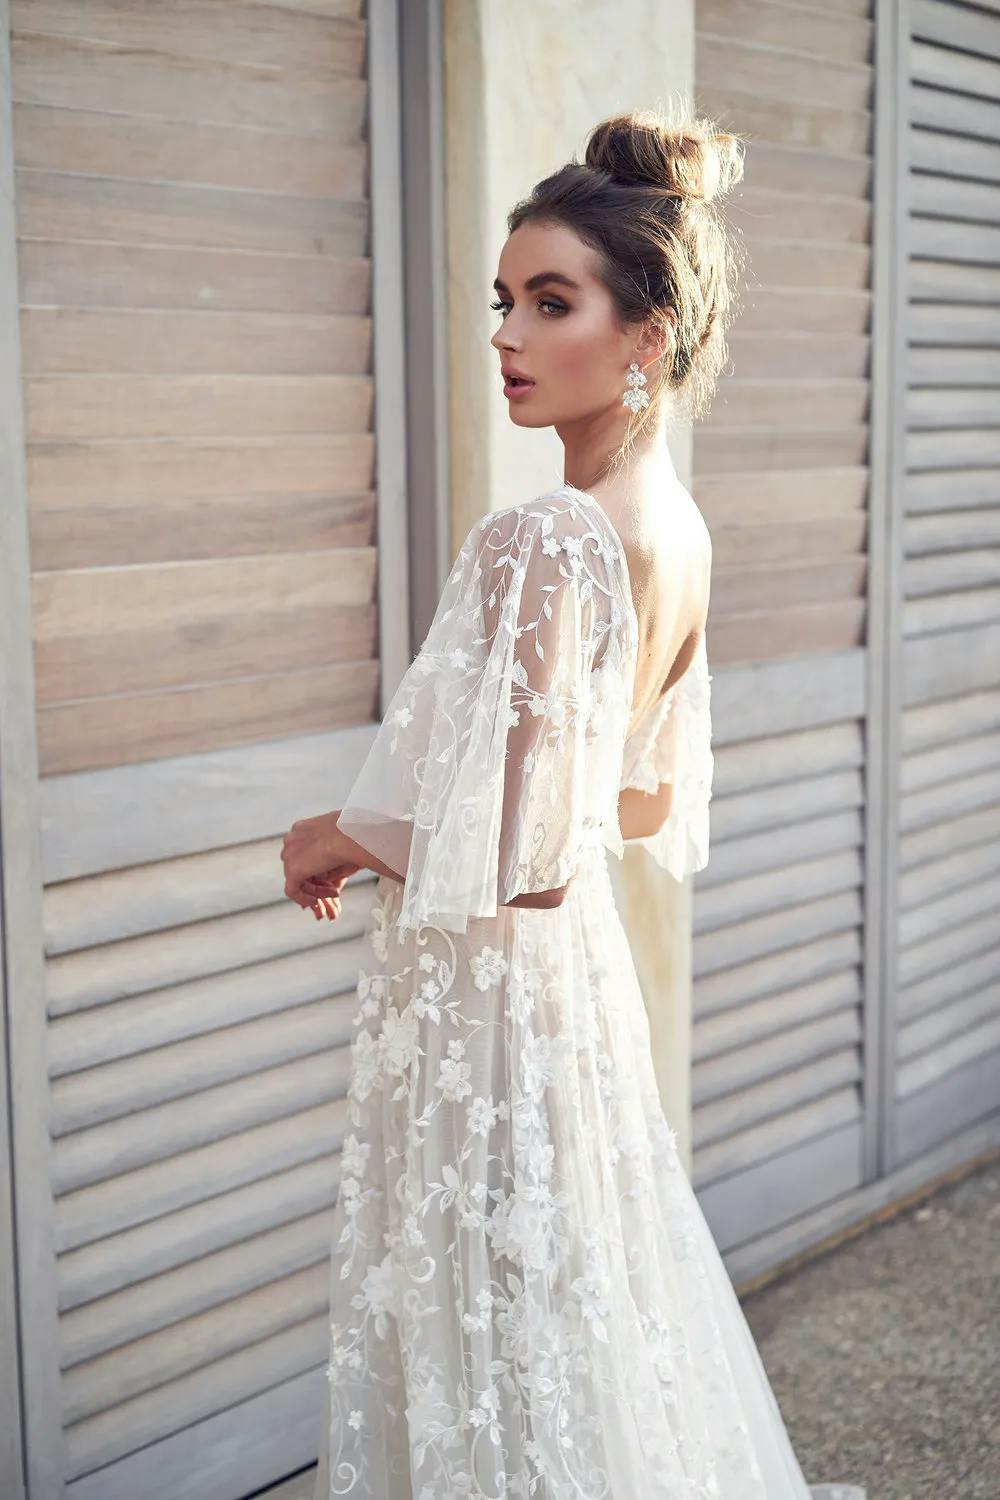 A woman stands in front of wooden shutters, wearing a white, sheer wedding gown with floral lace details. She has her hair in an updo and is turned slightly to the side, looking over her shoulder. She wears statement earrings, and the setting appears to be outdoors.